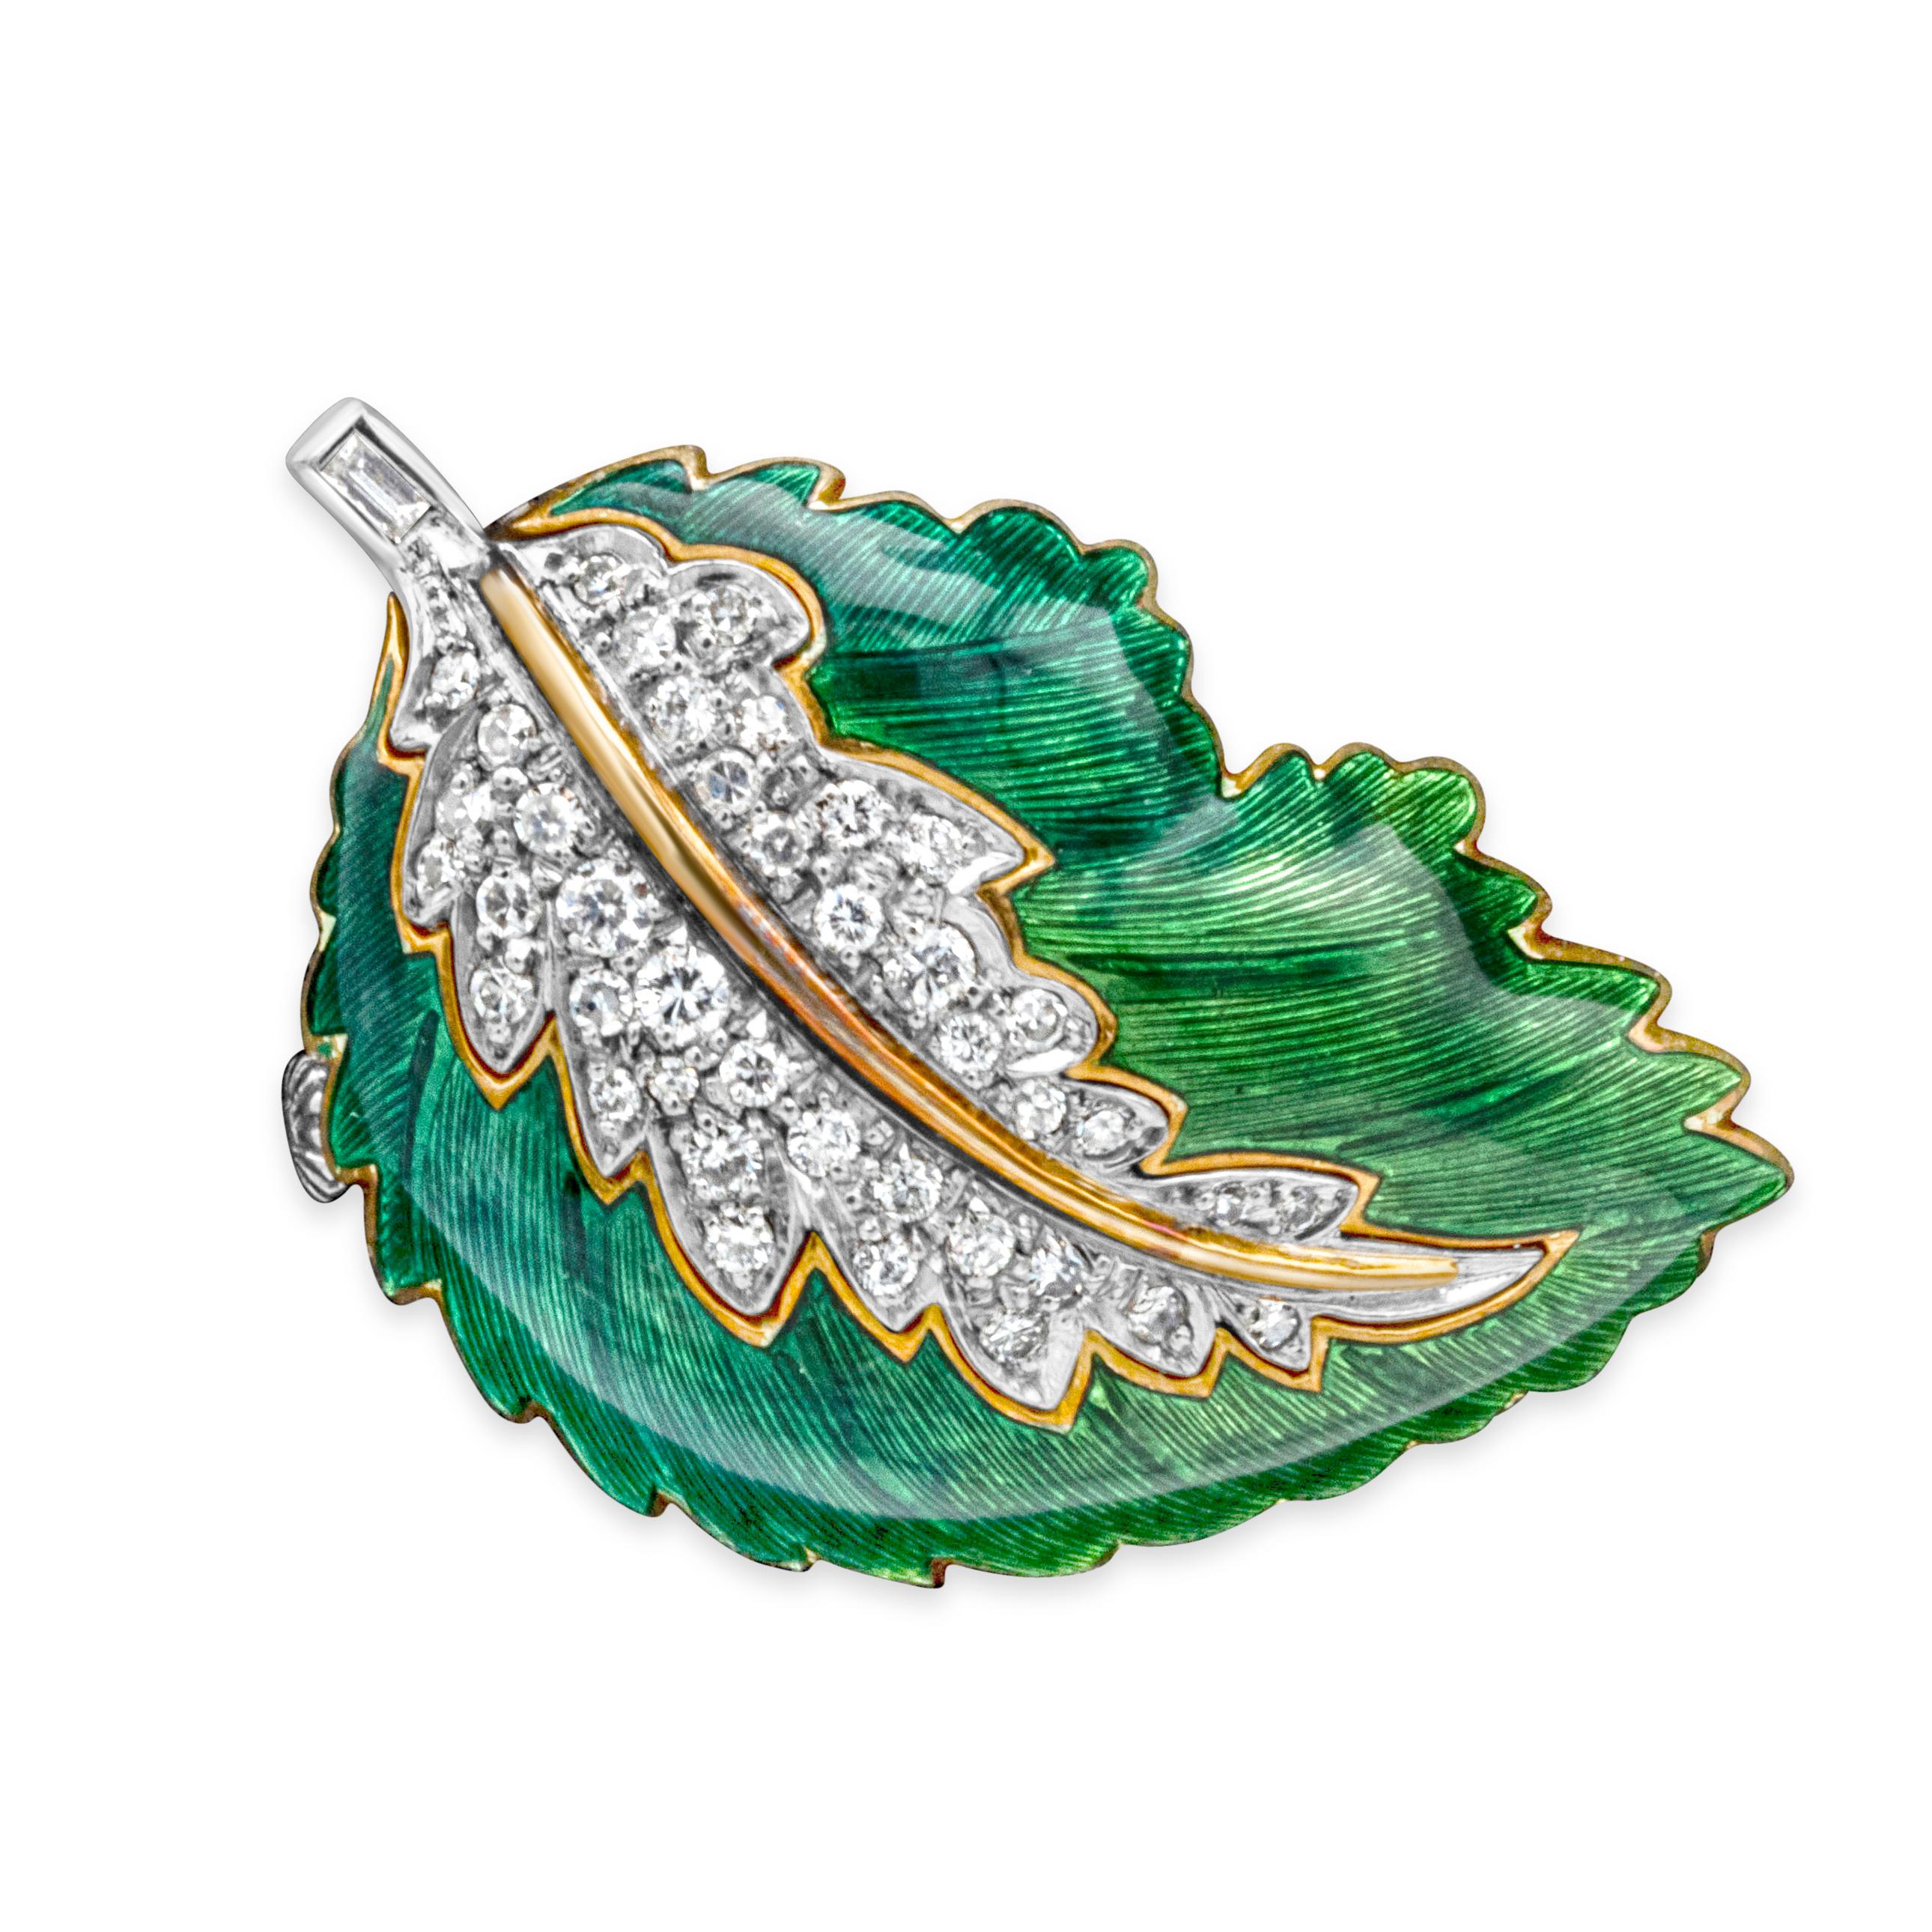 Showcasing a classic and beautiful brooch set in a green enamel leaf-like design and encrusted with 41 brilliant round diamonds, pave set weighing 0.50 carats total, F-G color and VS-SI in clarity. Perfectly made in 18k yellow gold and